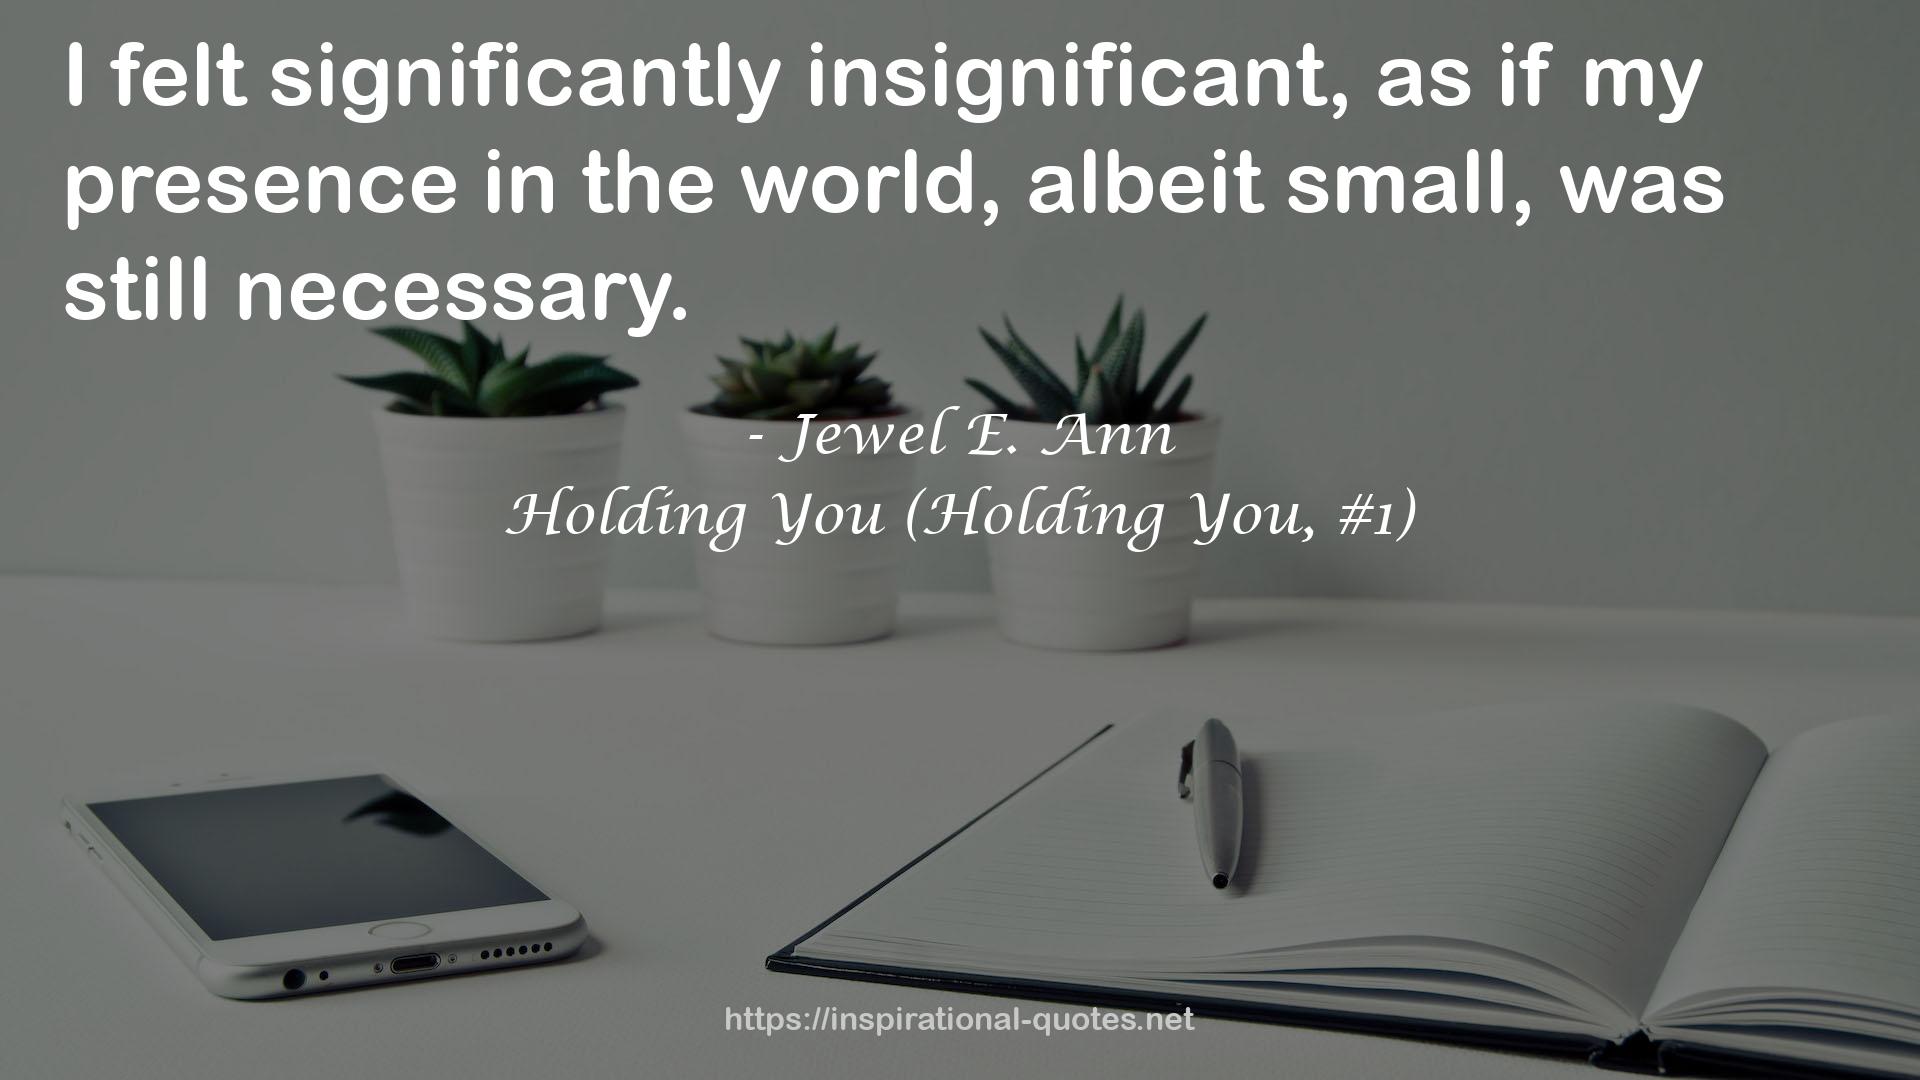 Holding You (Holding You, #1) QUOTES